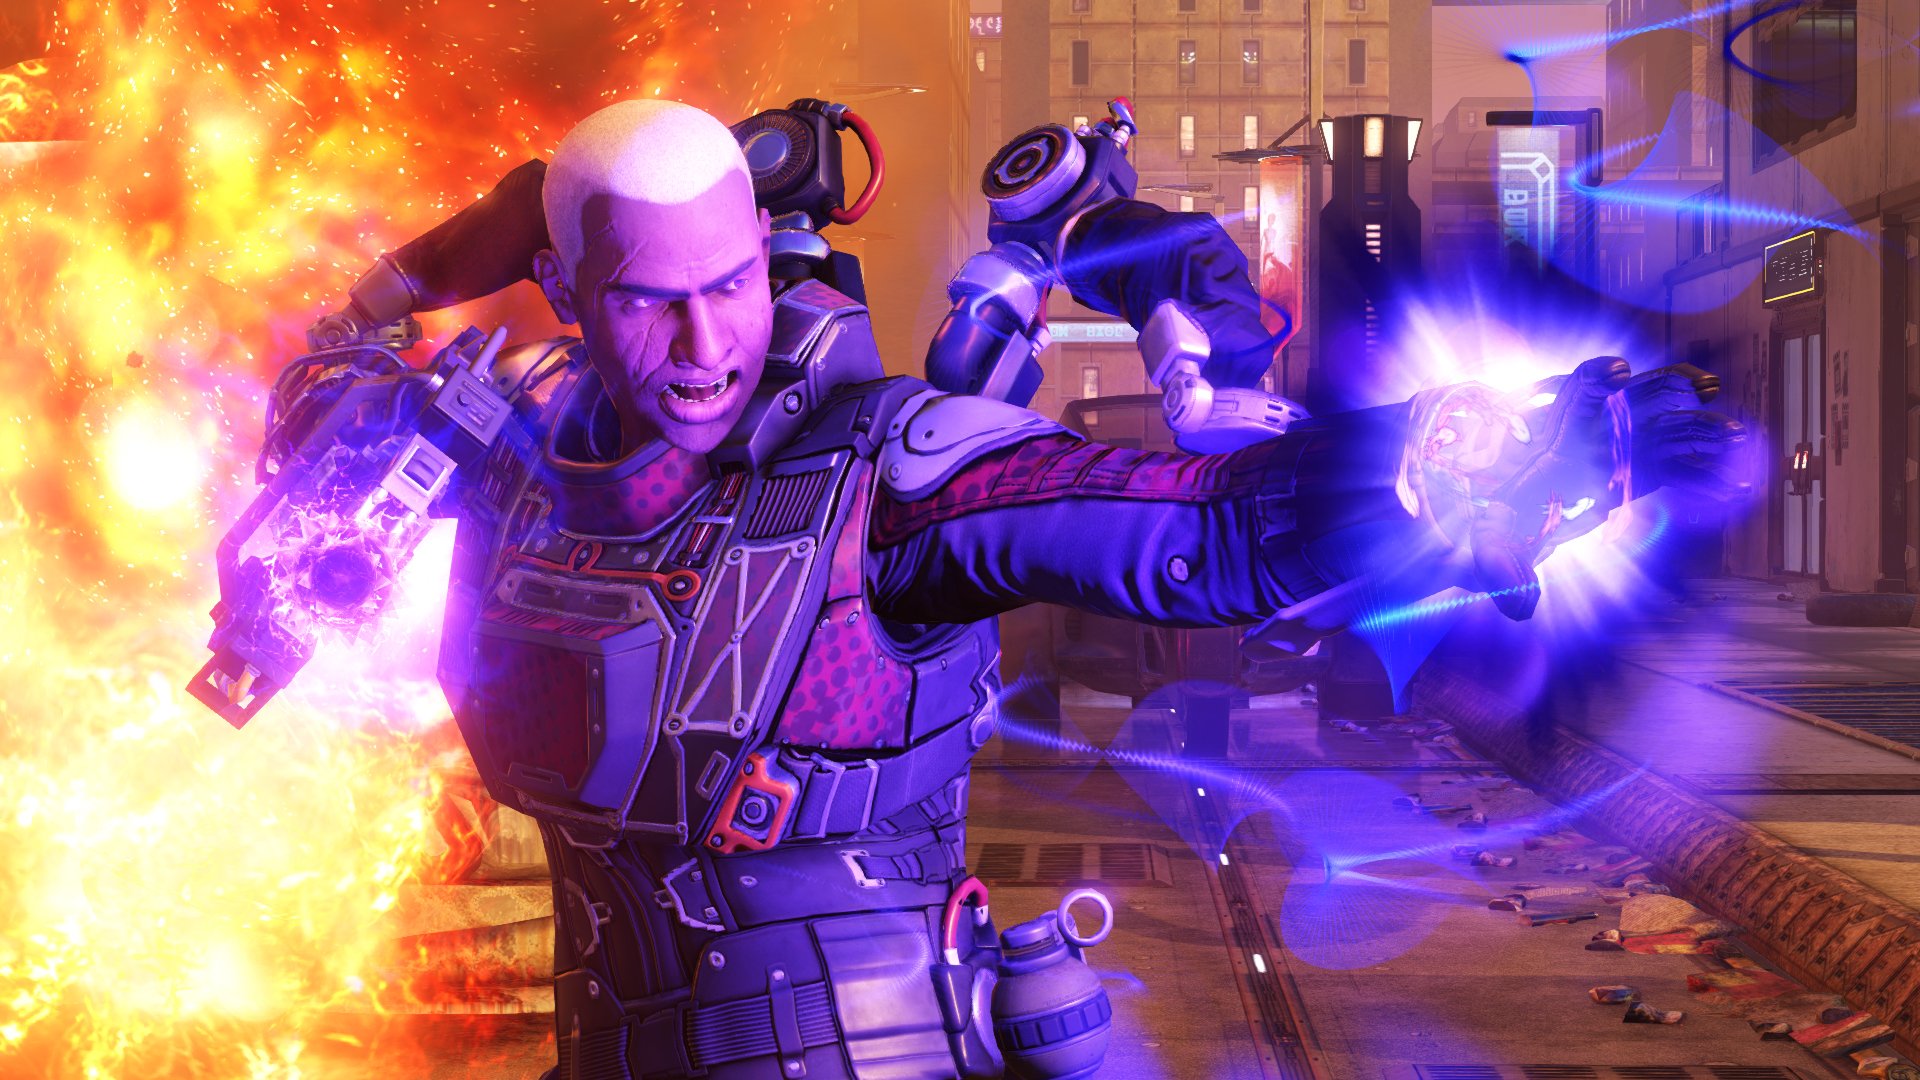 XCOM director says no plans for the series while he's still